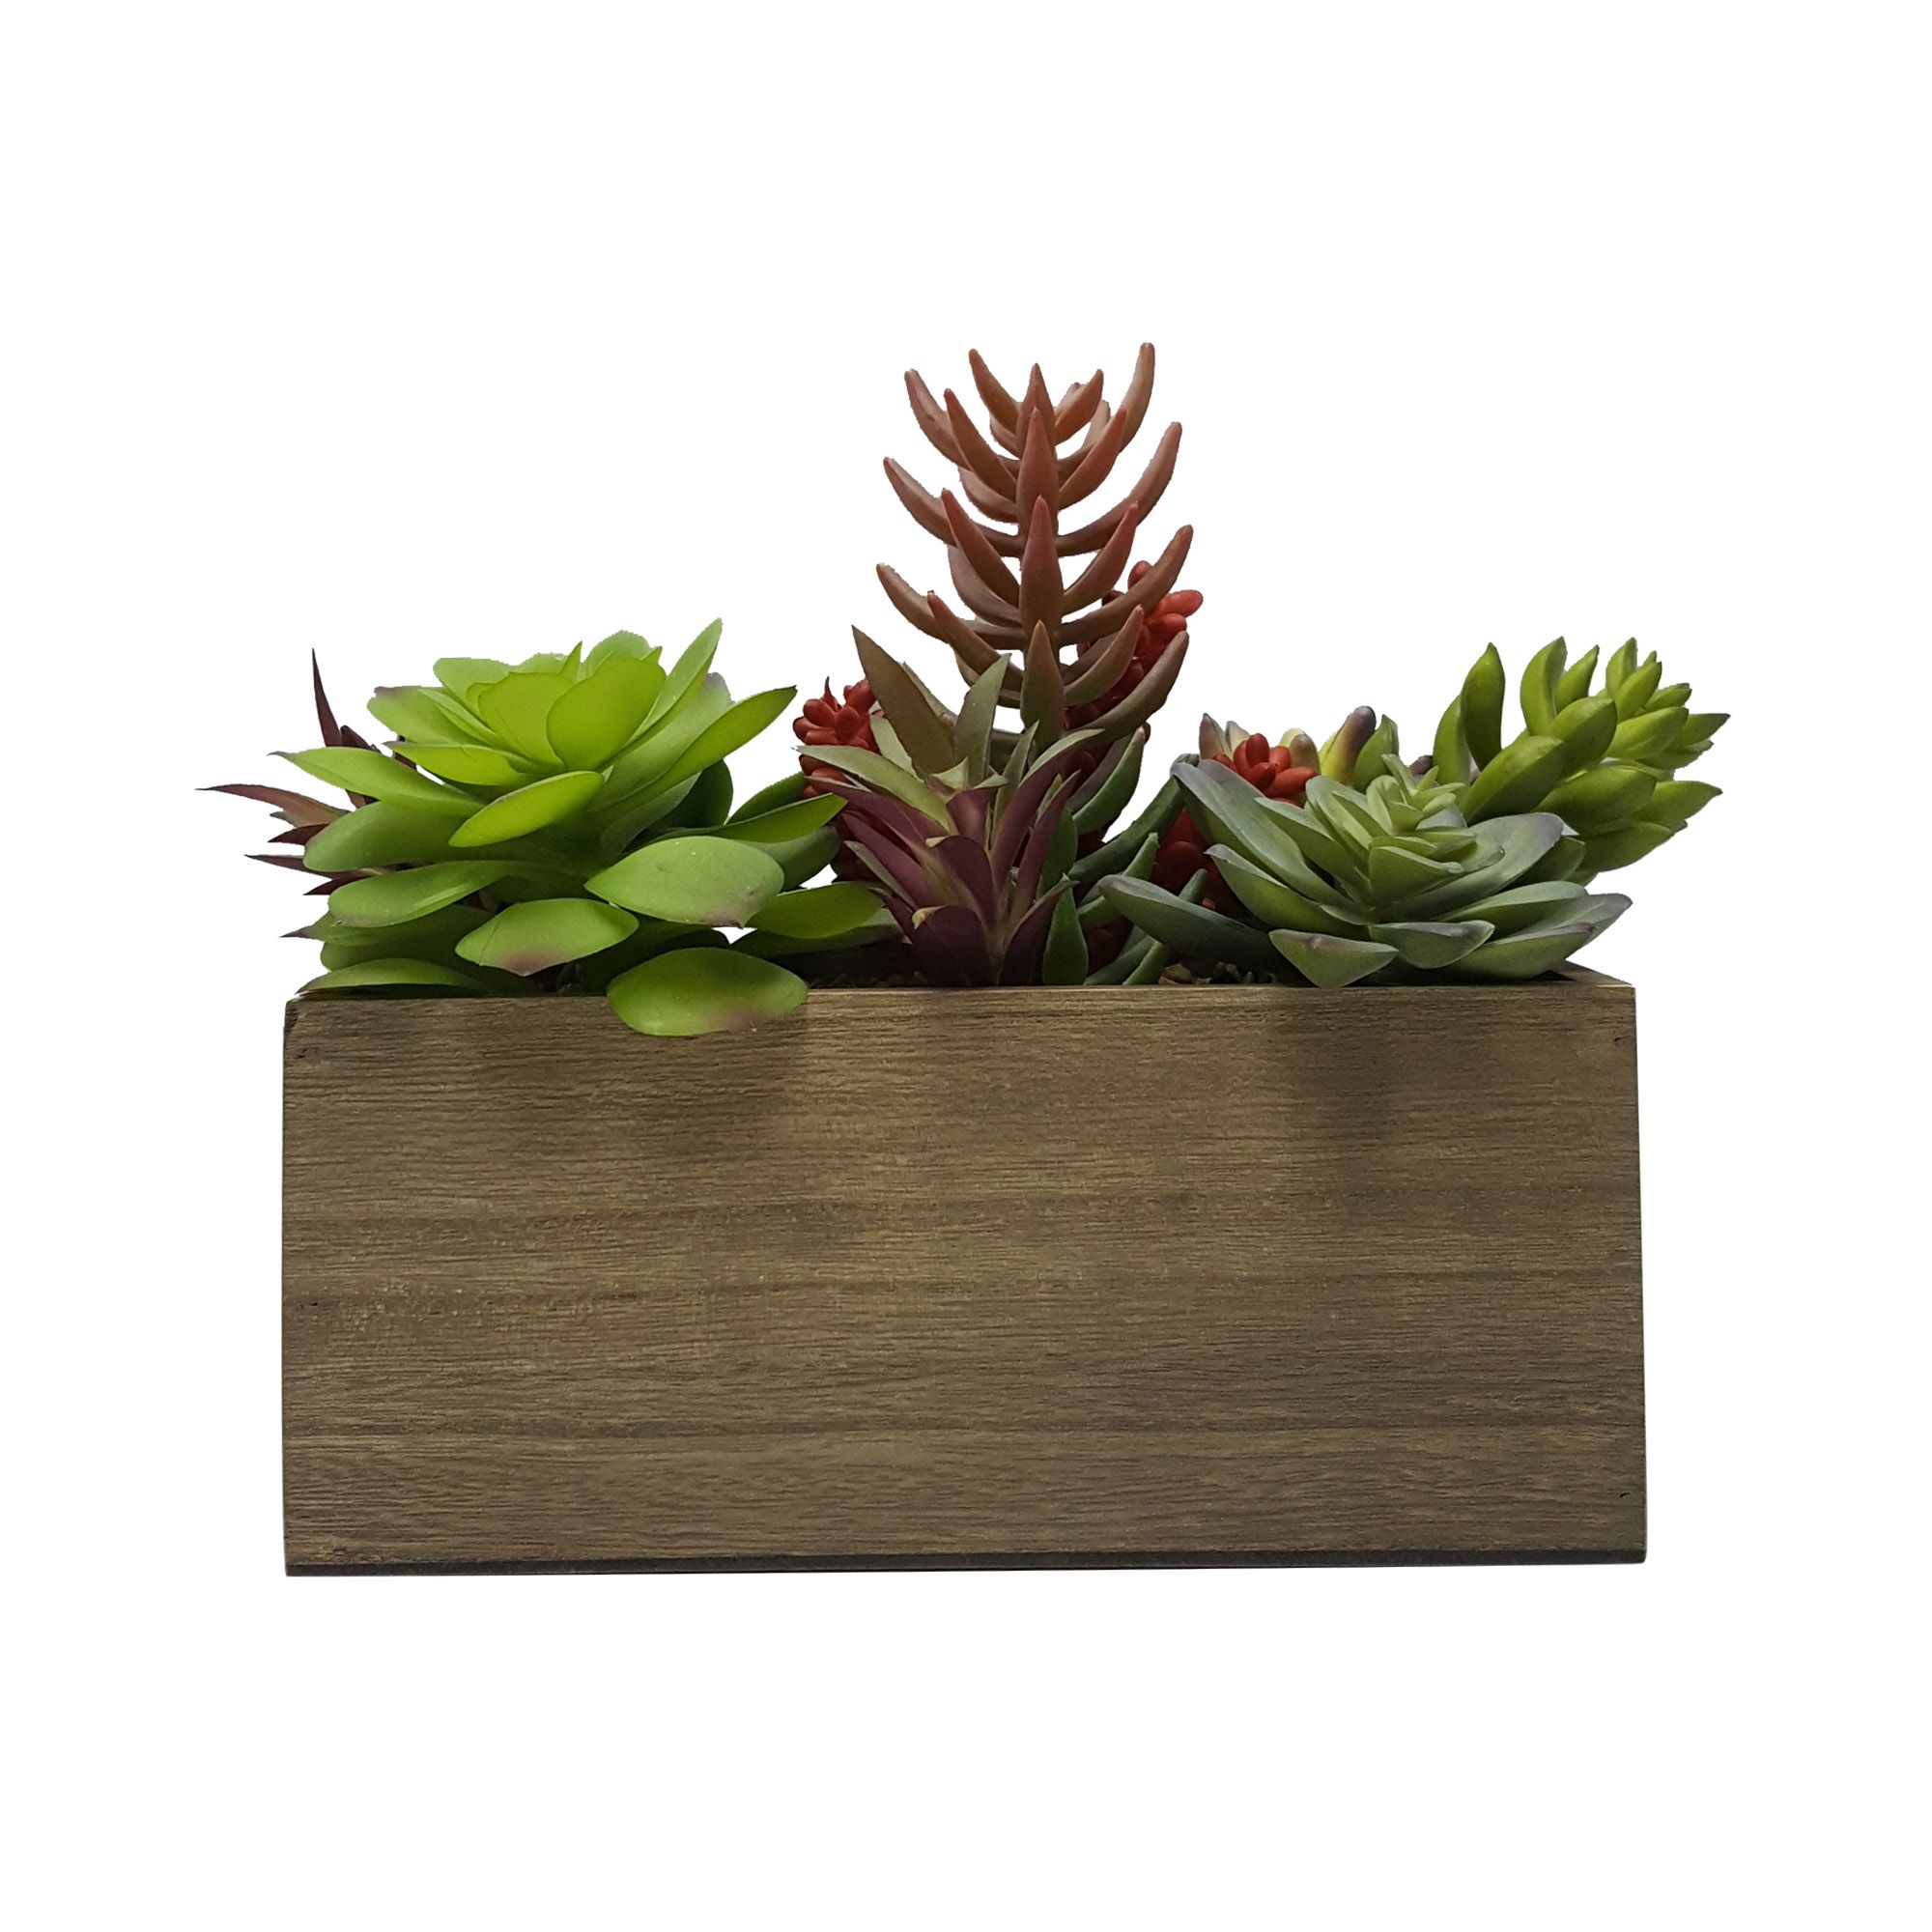 Better Homes & Gardens 7.5" Artificial Mixed Succulent Plants in Brown Wood Box - image 5 of 7